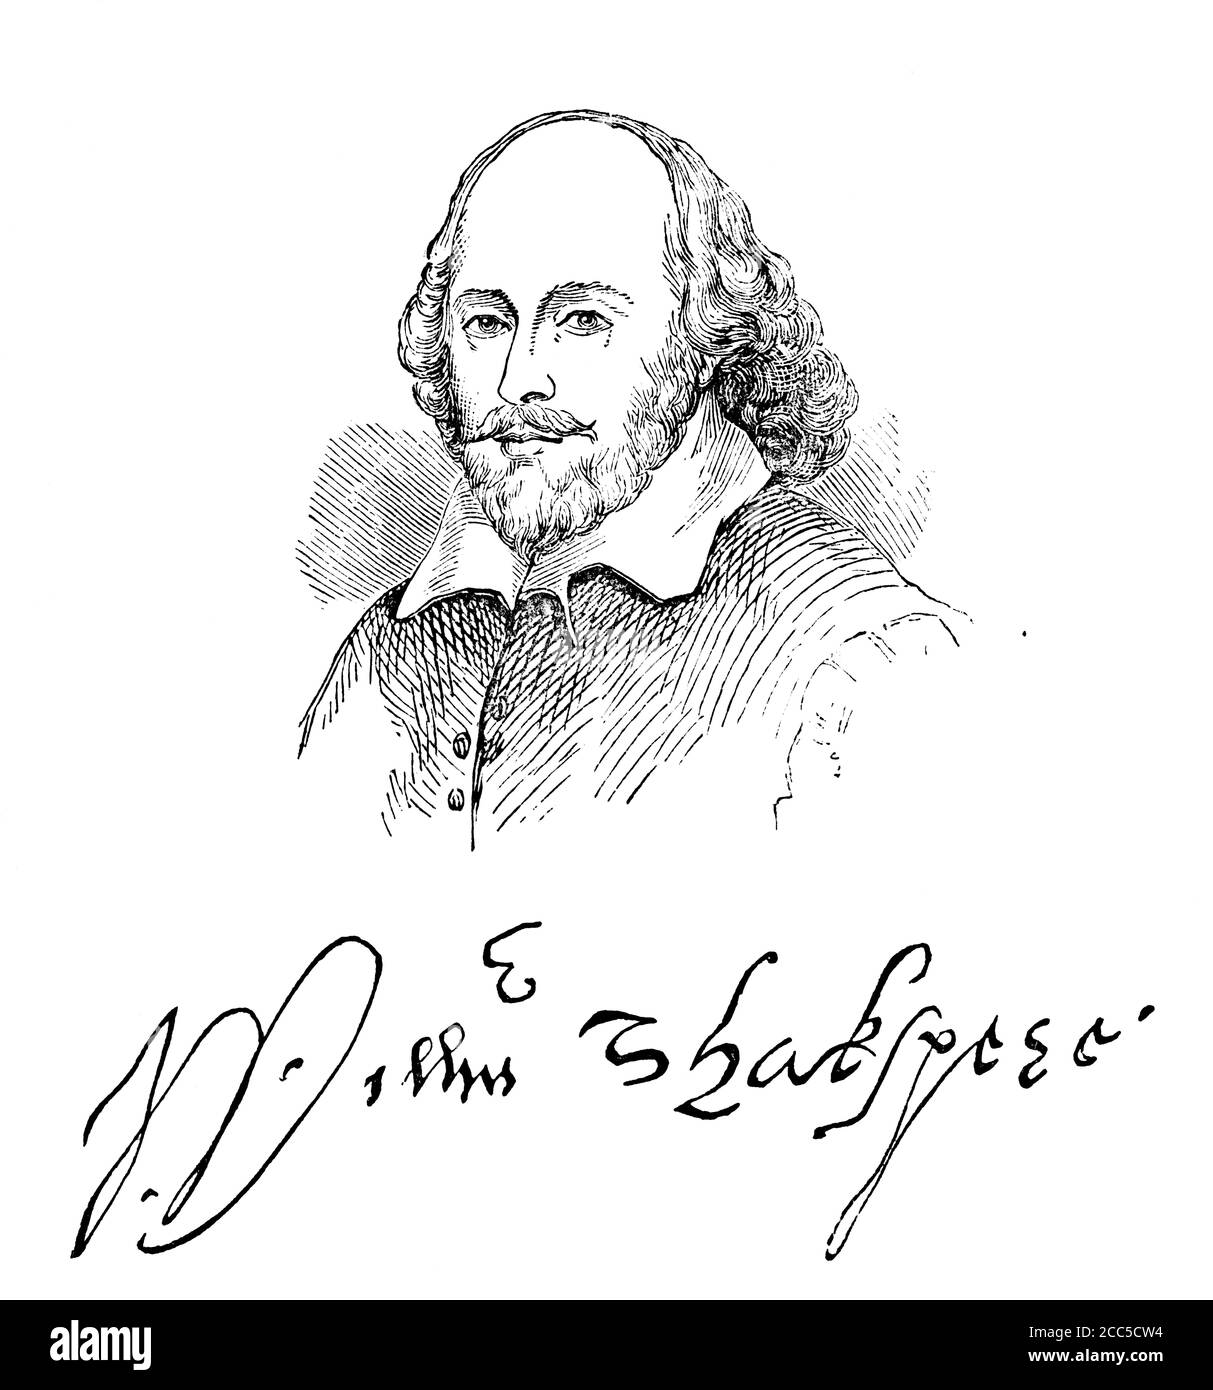 An engraved illustration portrait of the Elizabethan playwright William Shakespeare and his signature from a Victorian book dated 1883 that is no long Stock Photo